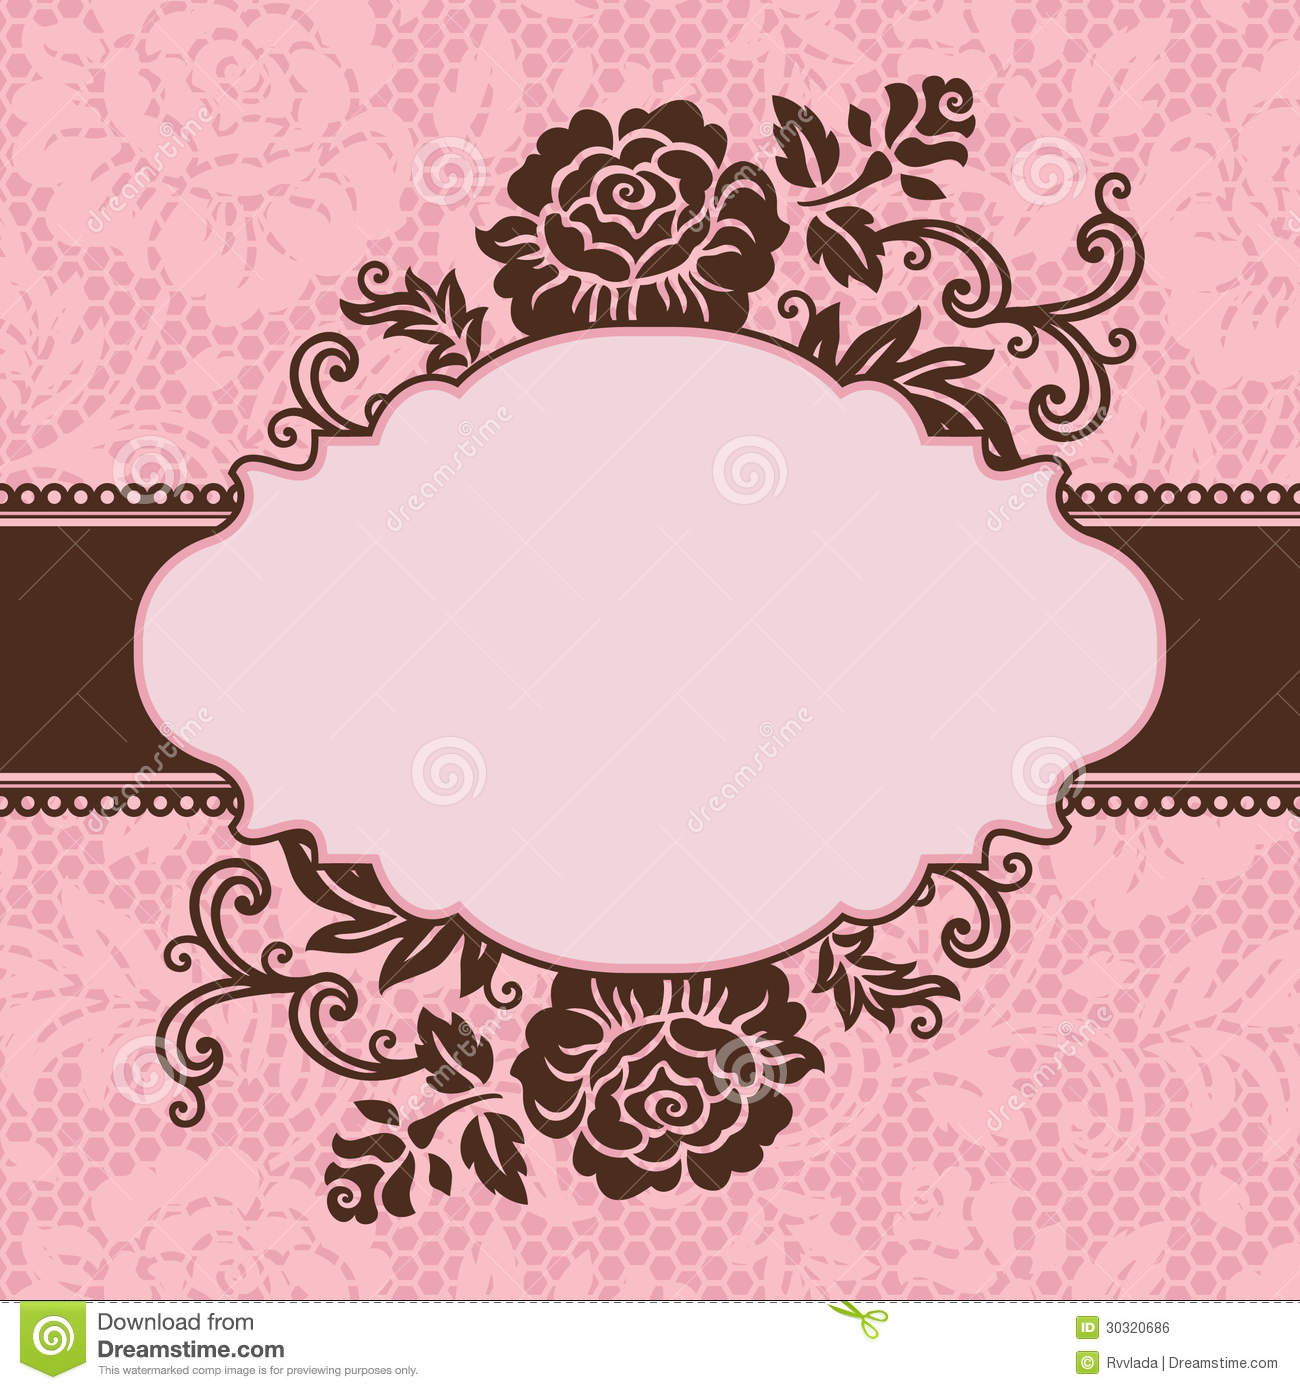 Vector Lace Background with Pink Flowers On the Frame